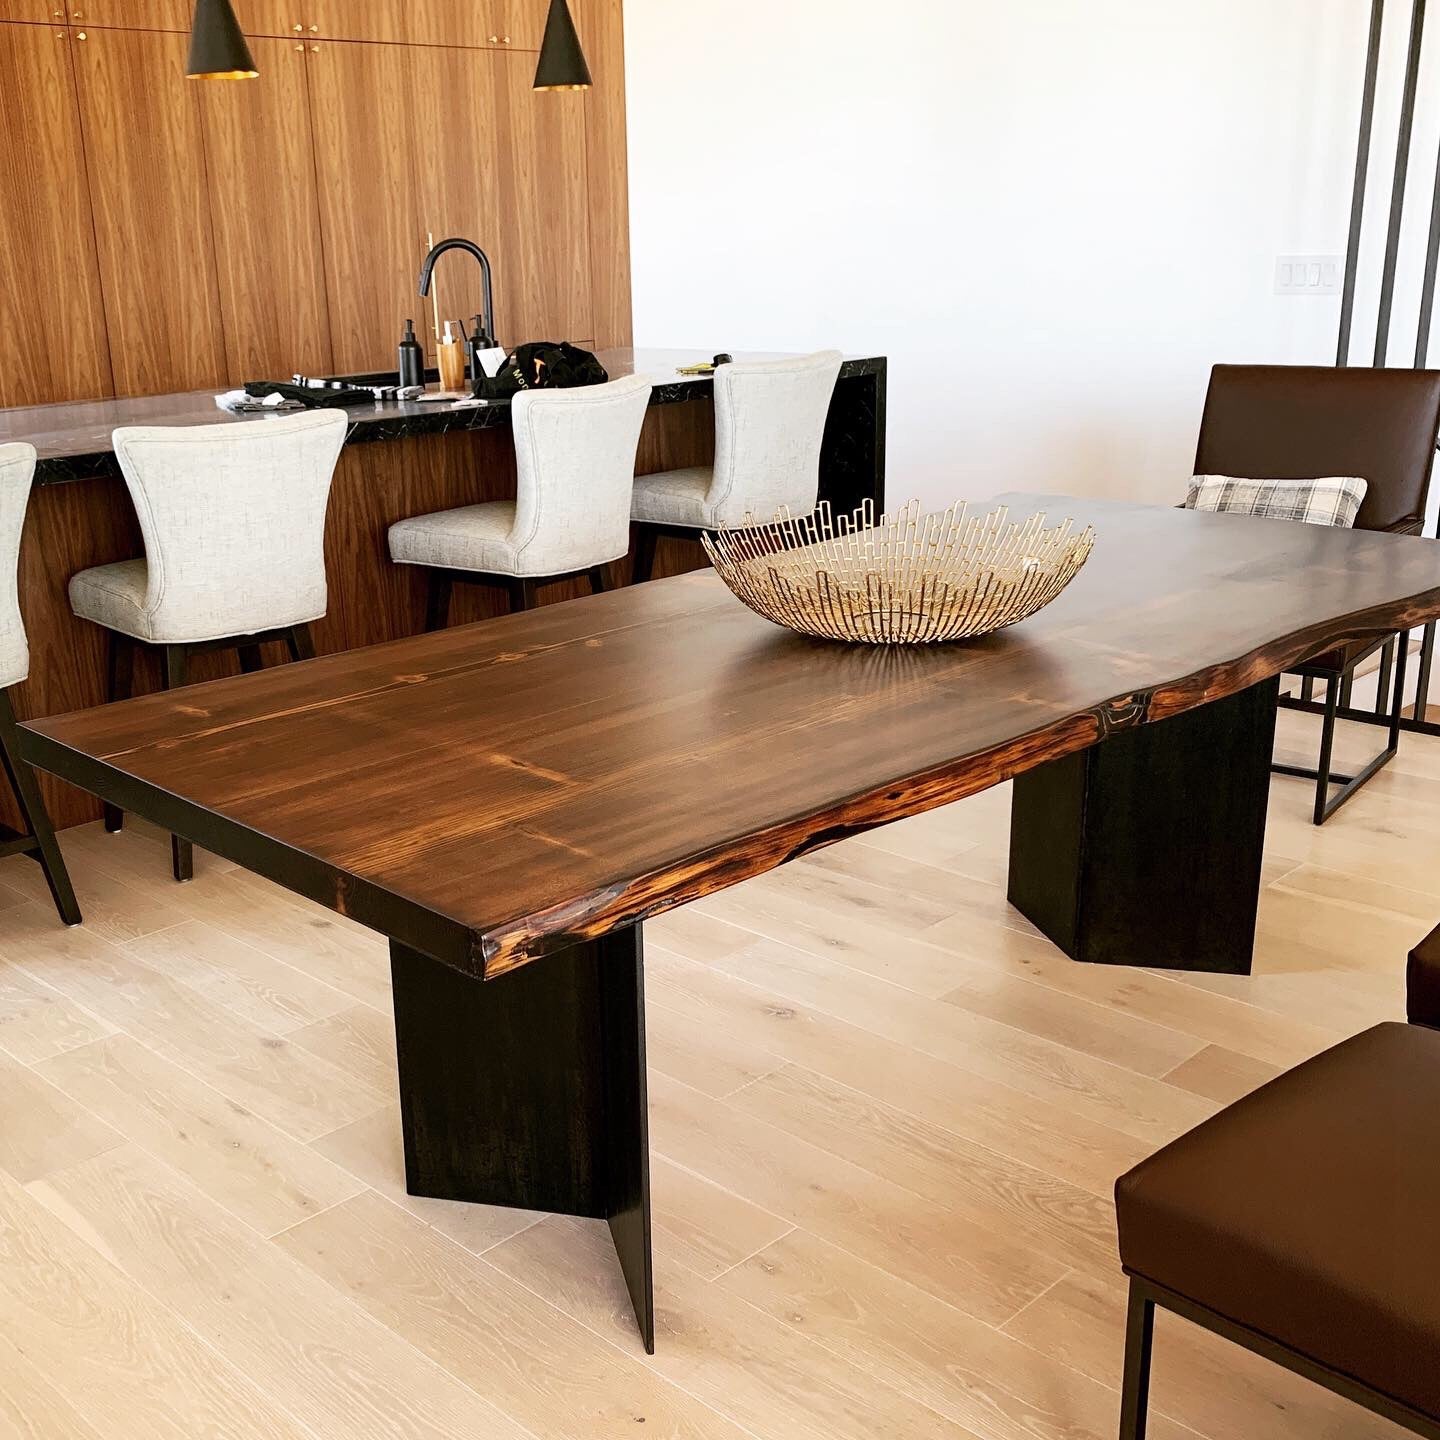 Get the best San Diego live edge tables at Old Fashioned Lumber